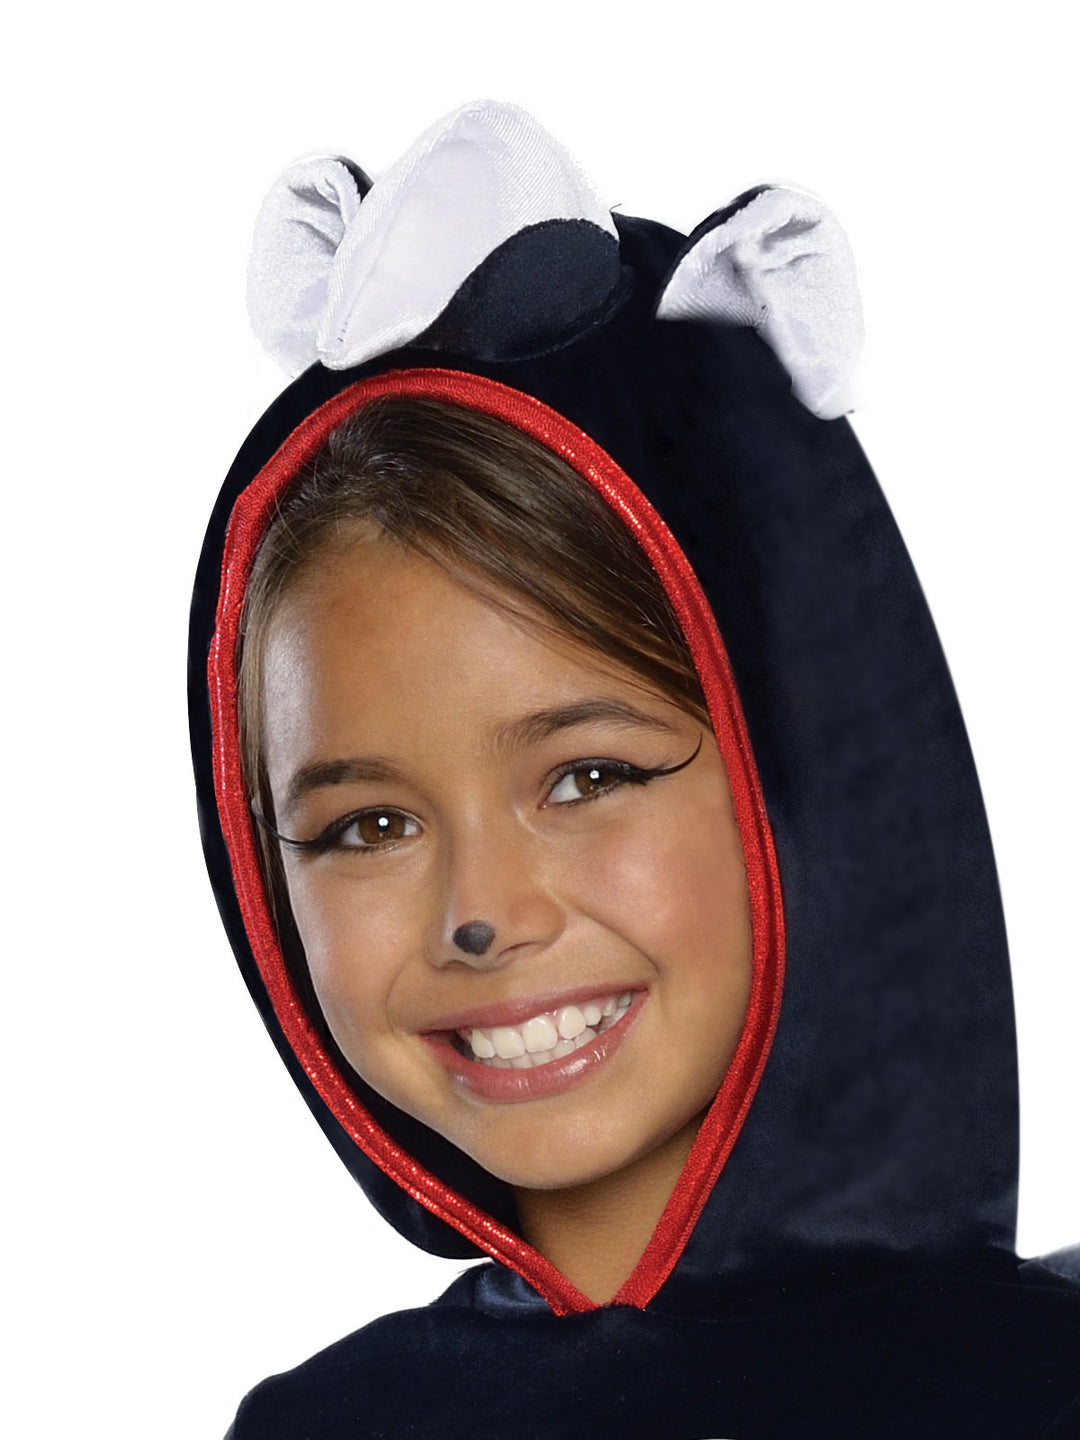 PEPE LE PEW HOODED COSTUME, CHILD